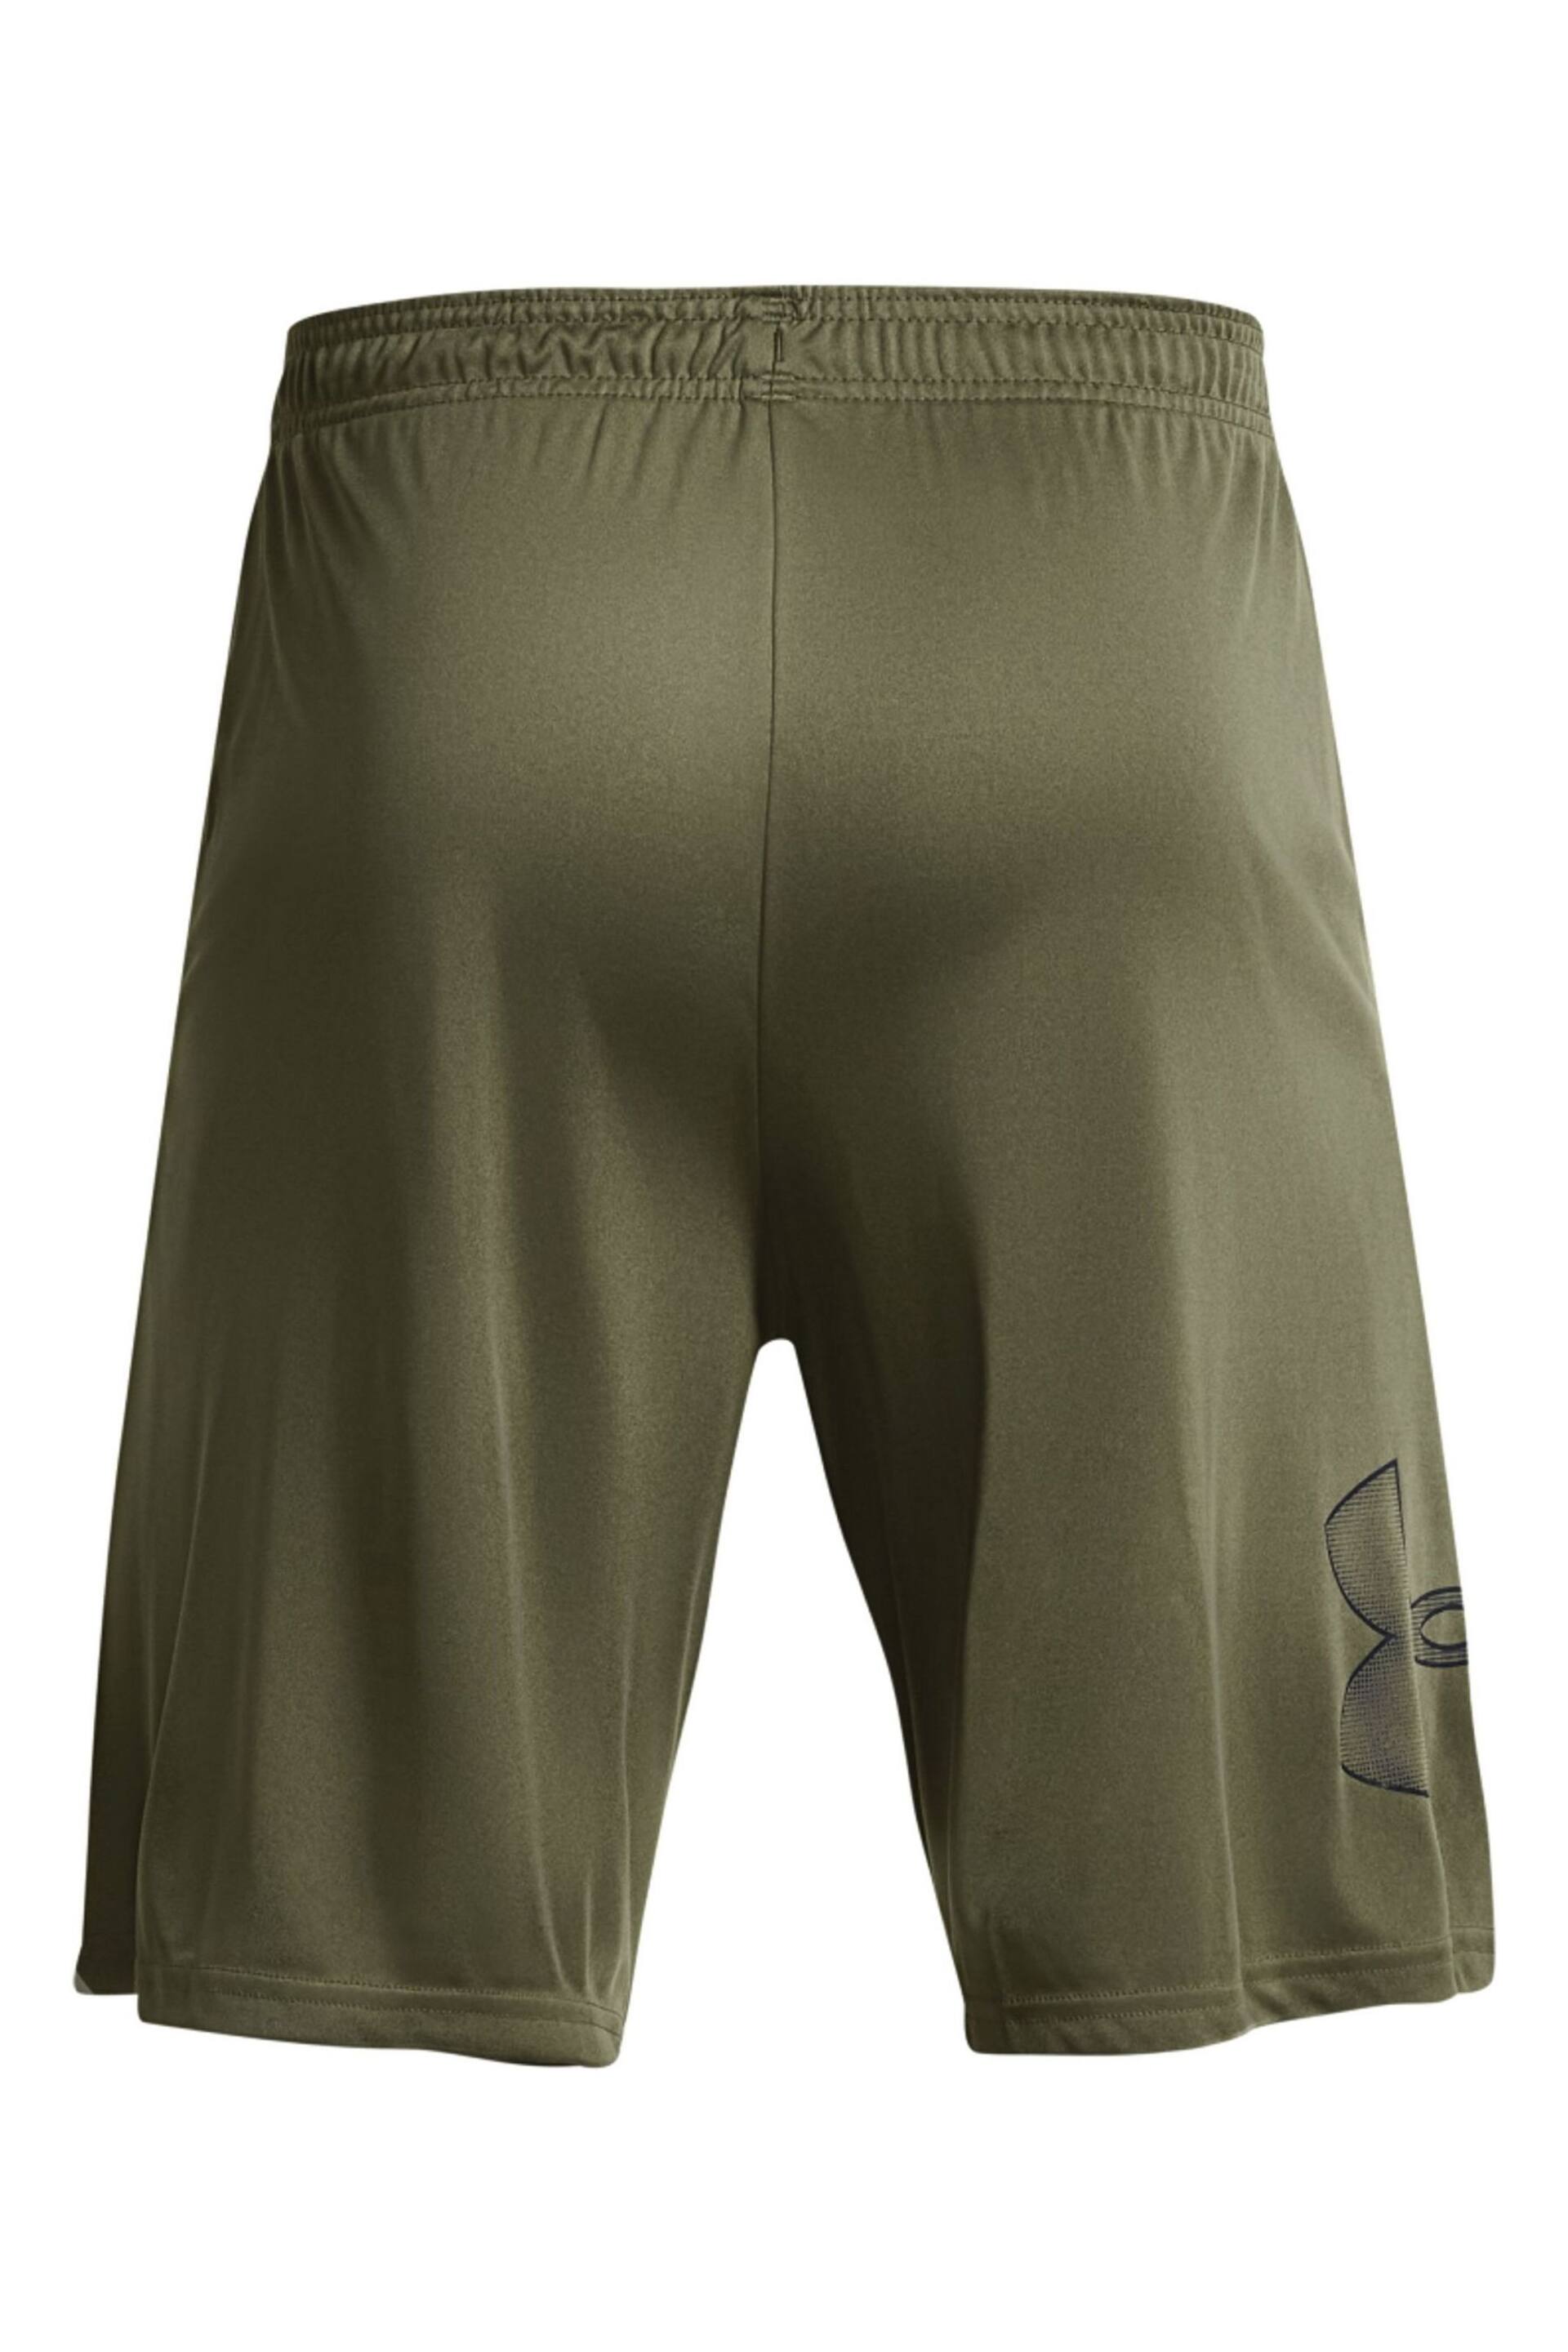 Under Armour Green Tech Graphic Shorts - Image 6 of 7